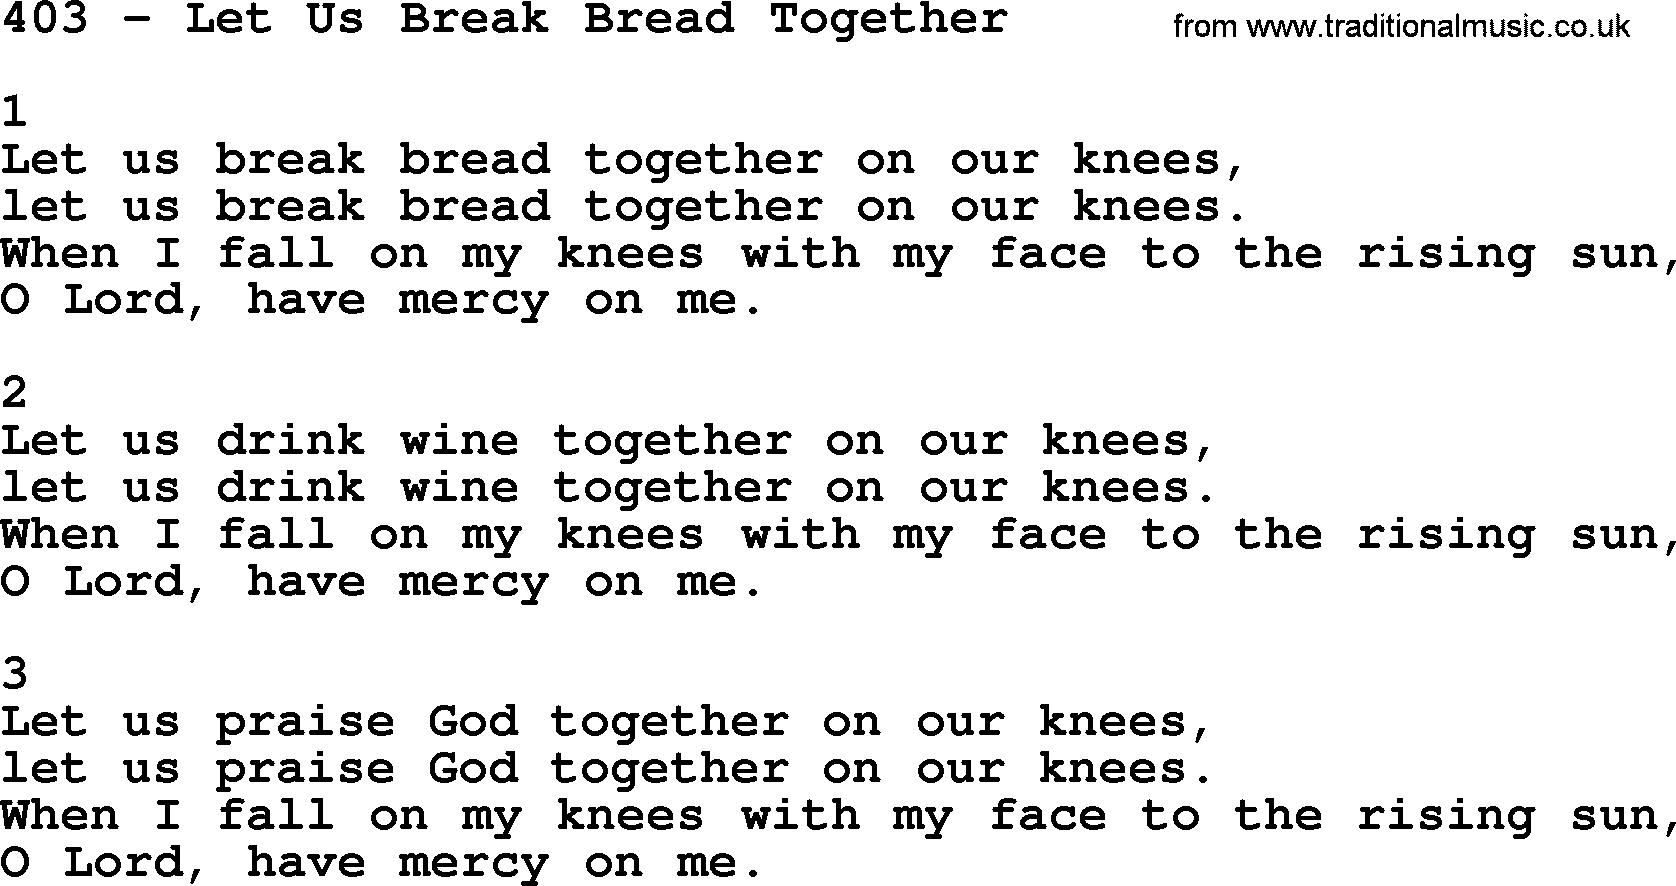 Complete Adventis Hymnal, title: 403-Let Us Break Bread Together, with lyrics, midi, mp3, powerpoints(PPT) and PDF,